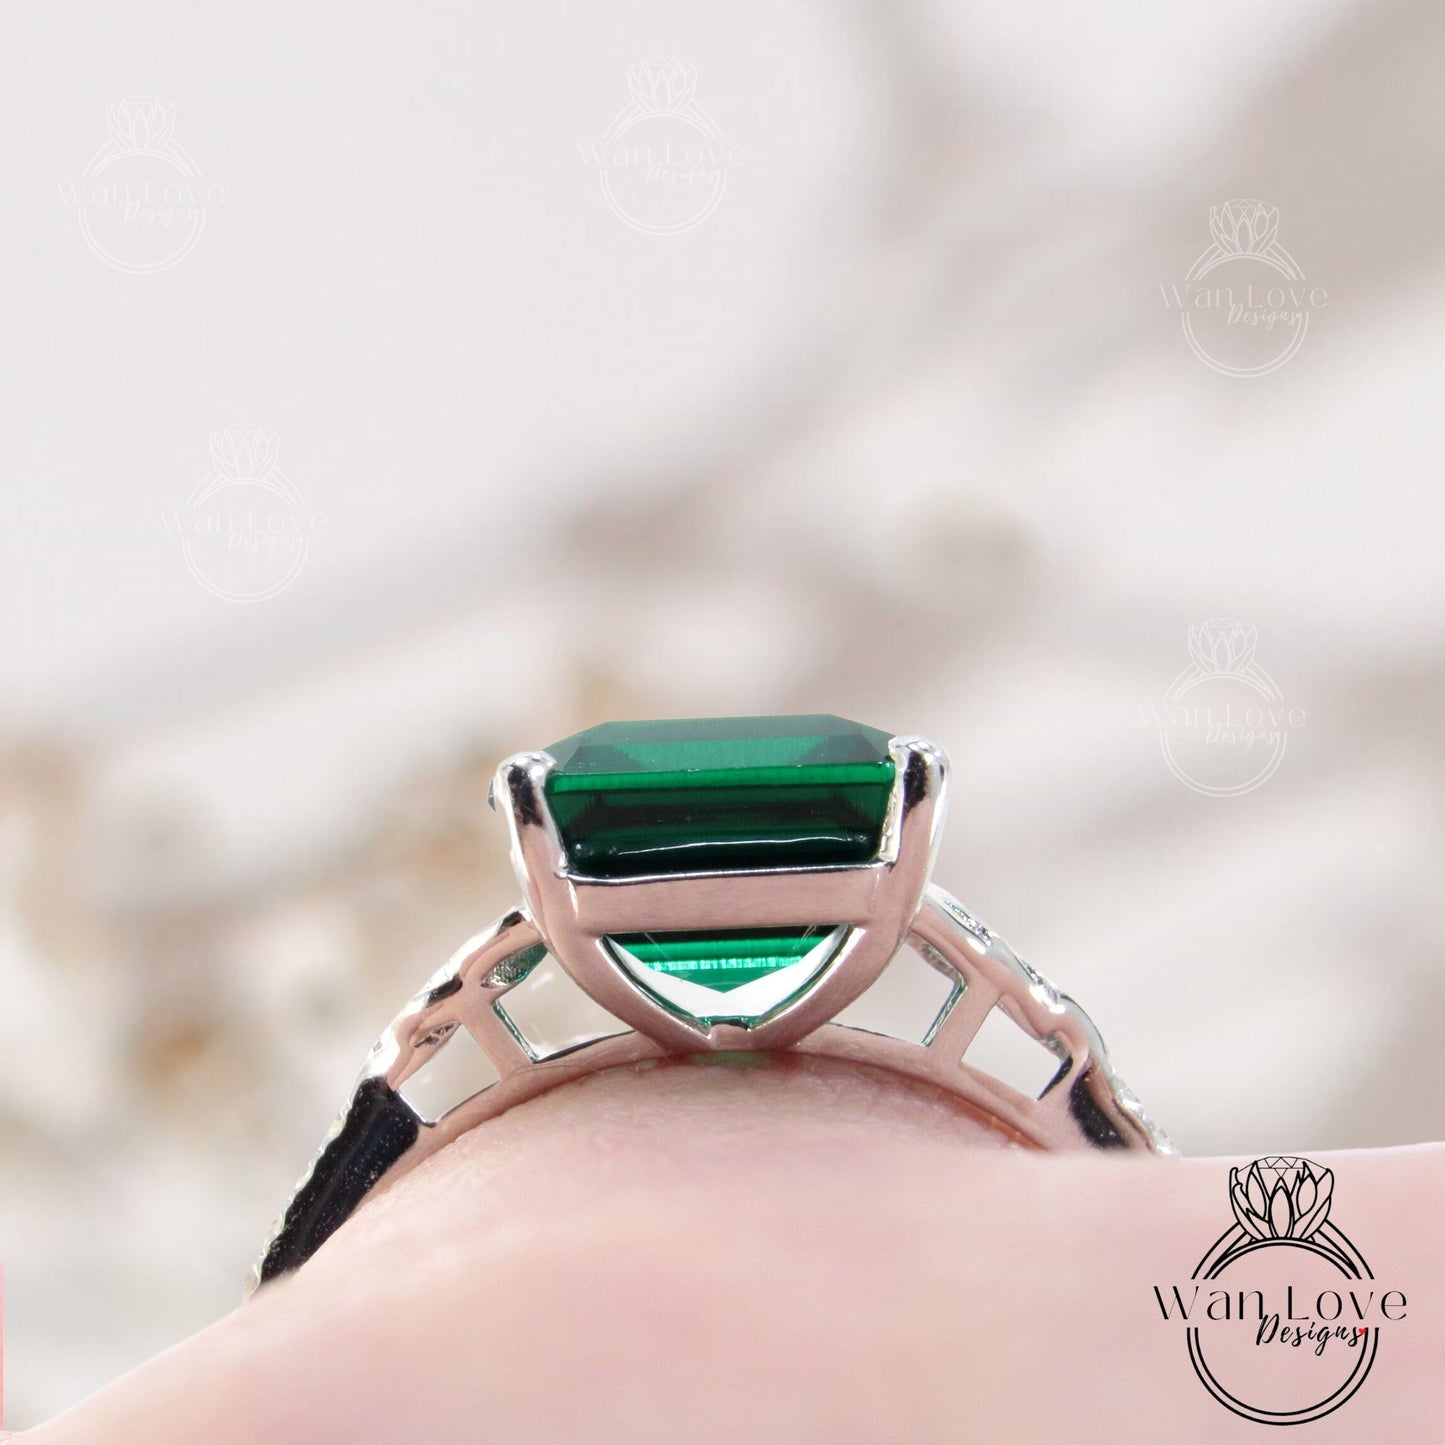 5ct Emerald Celtic Knot engagement ring emerald cut ring white gold ring celtic ring diamond ring unique bridal anniversary ring Ready ship Wan Love Designs